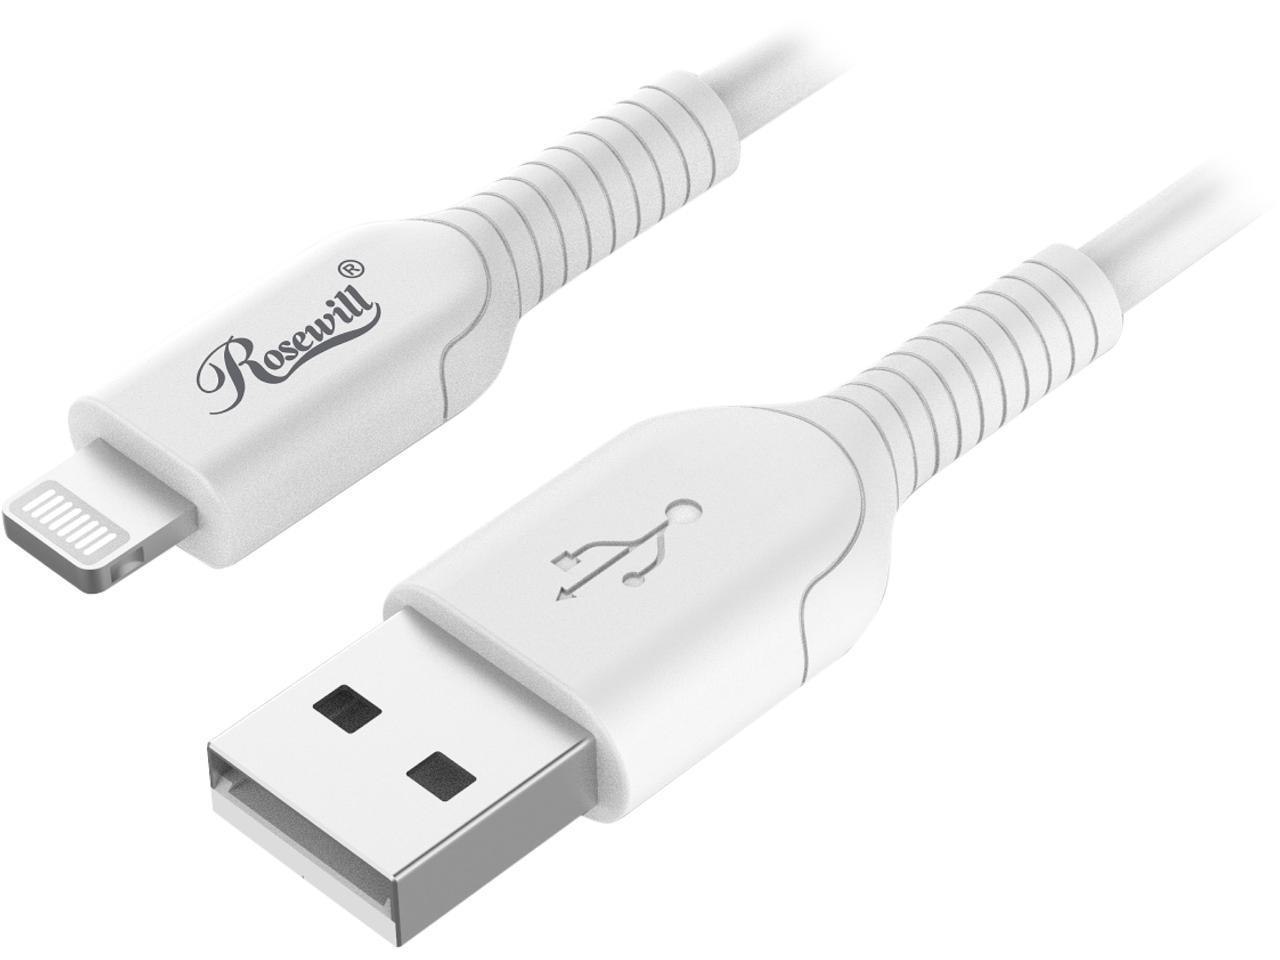 Rosewill iPhone Fast Charger Cable